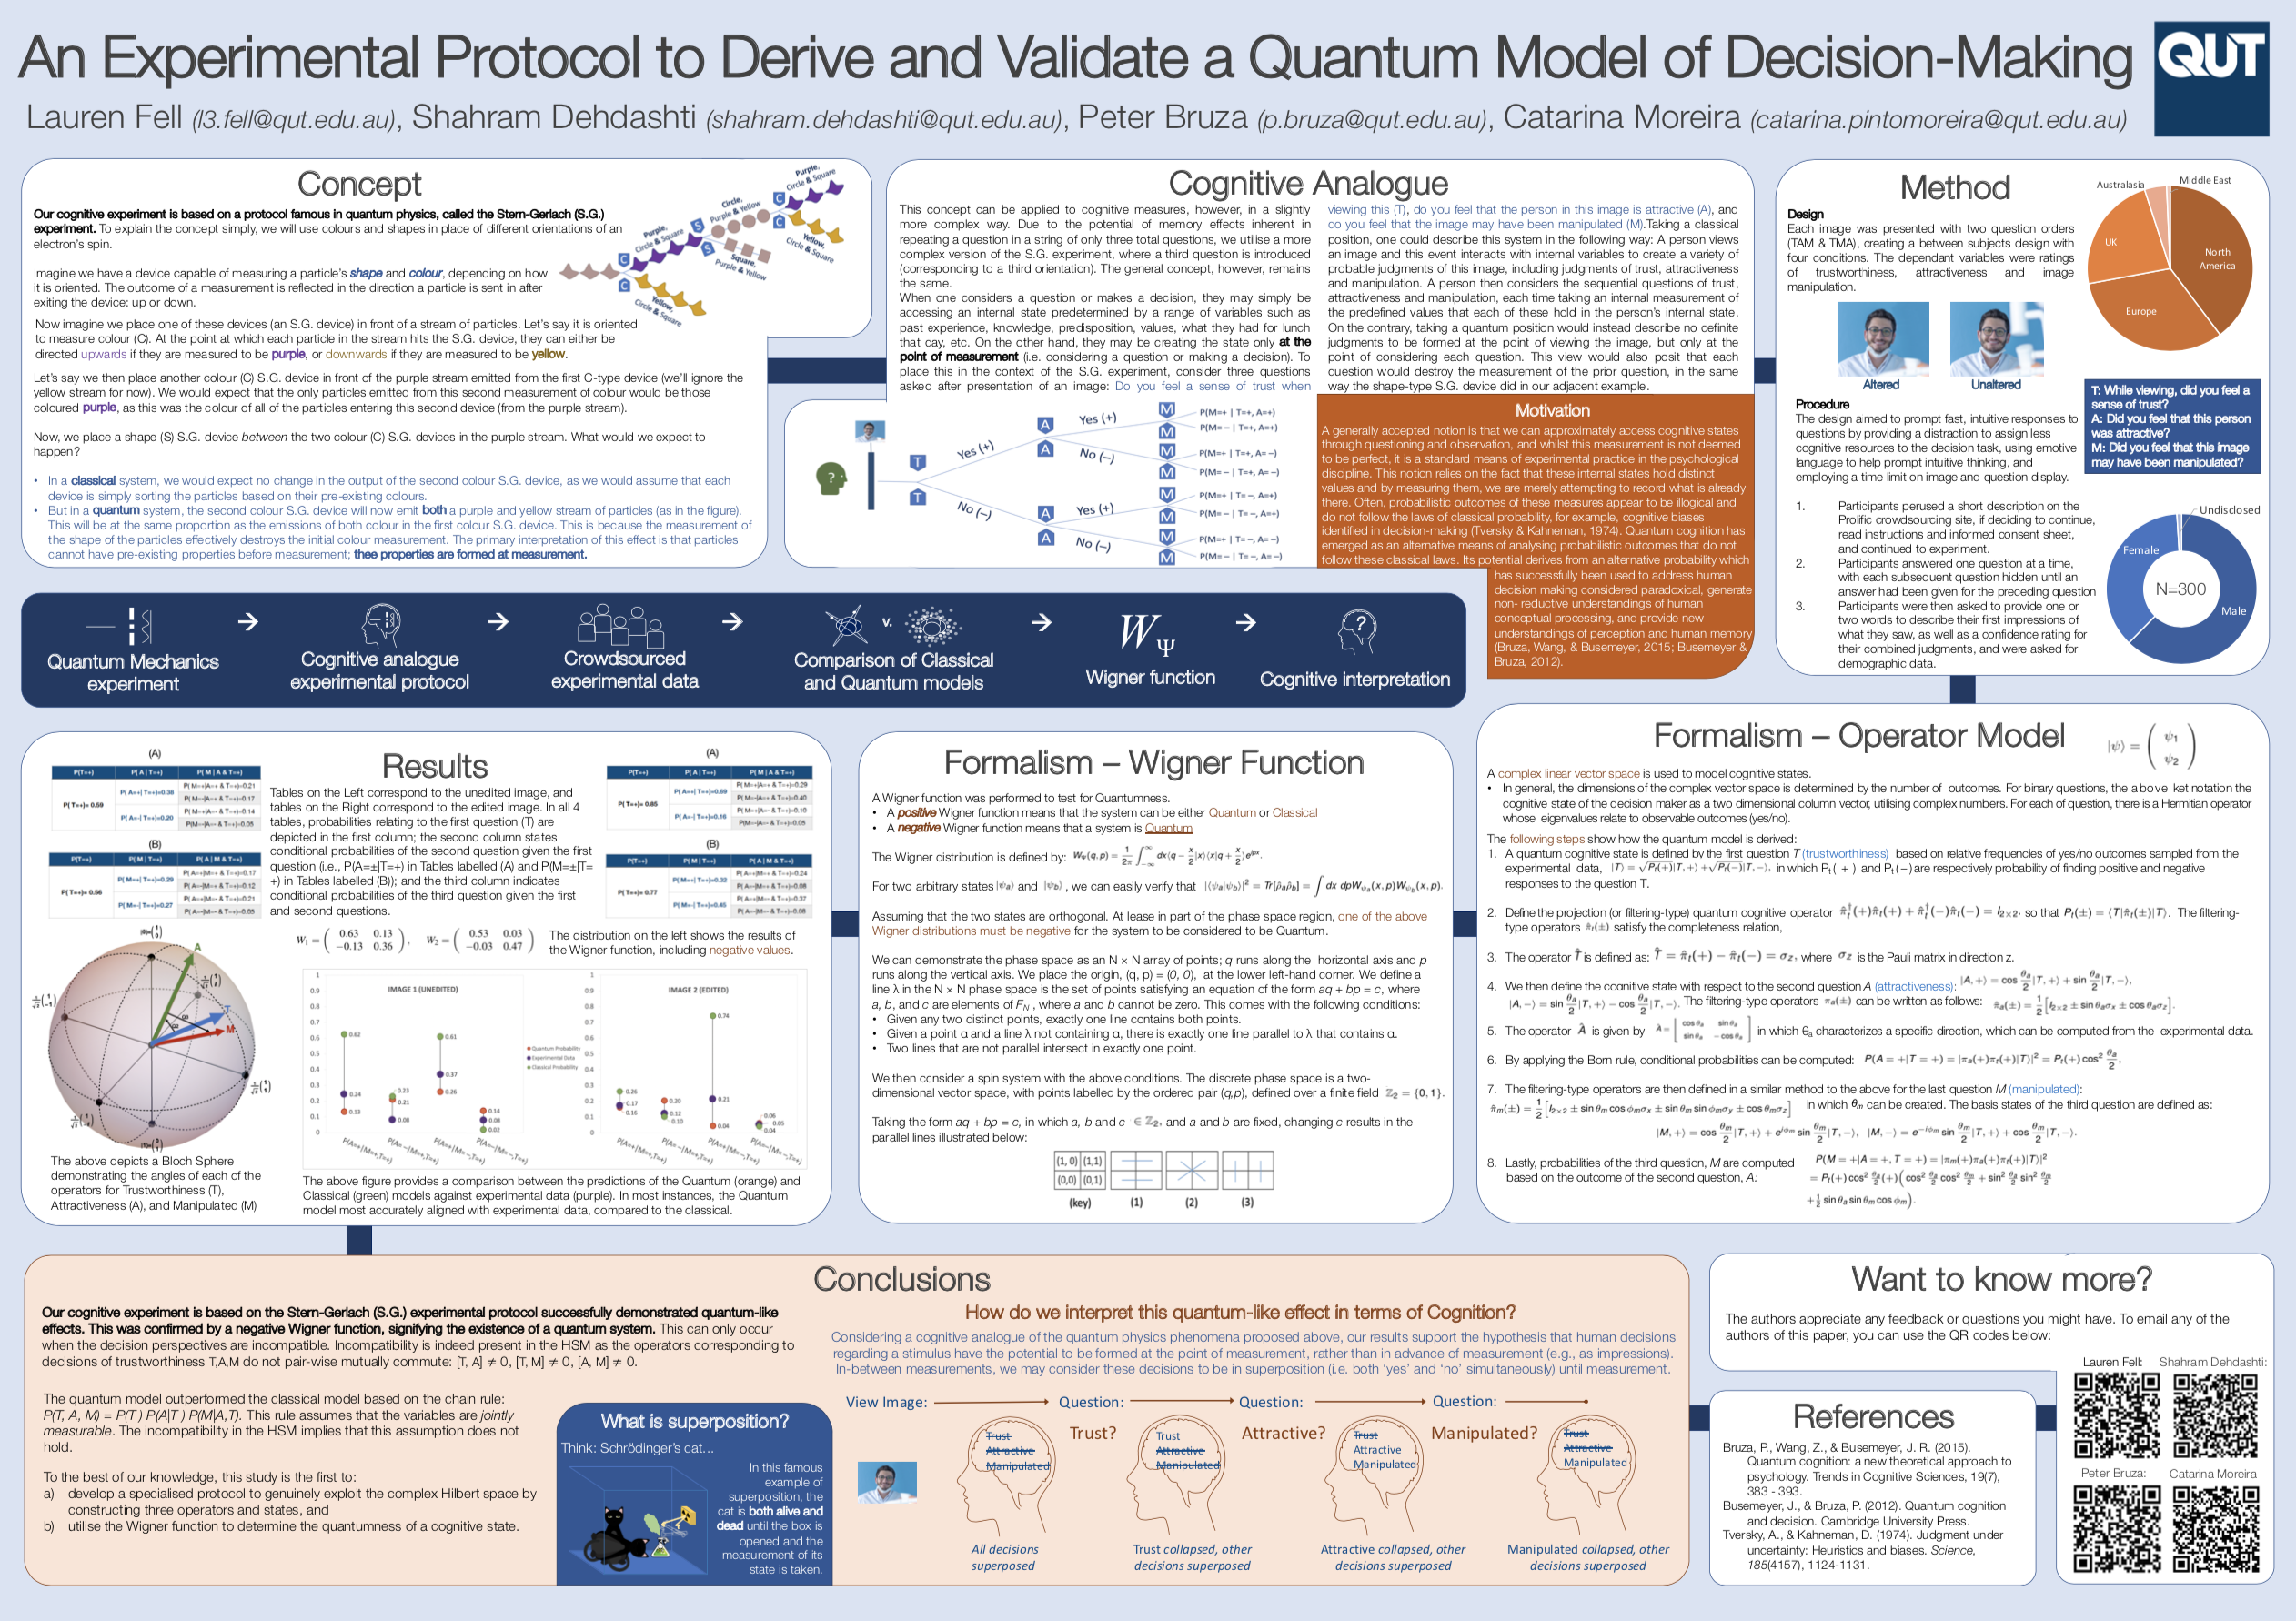 poster presented at cogsci 2019